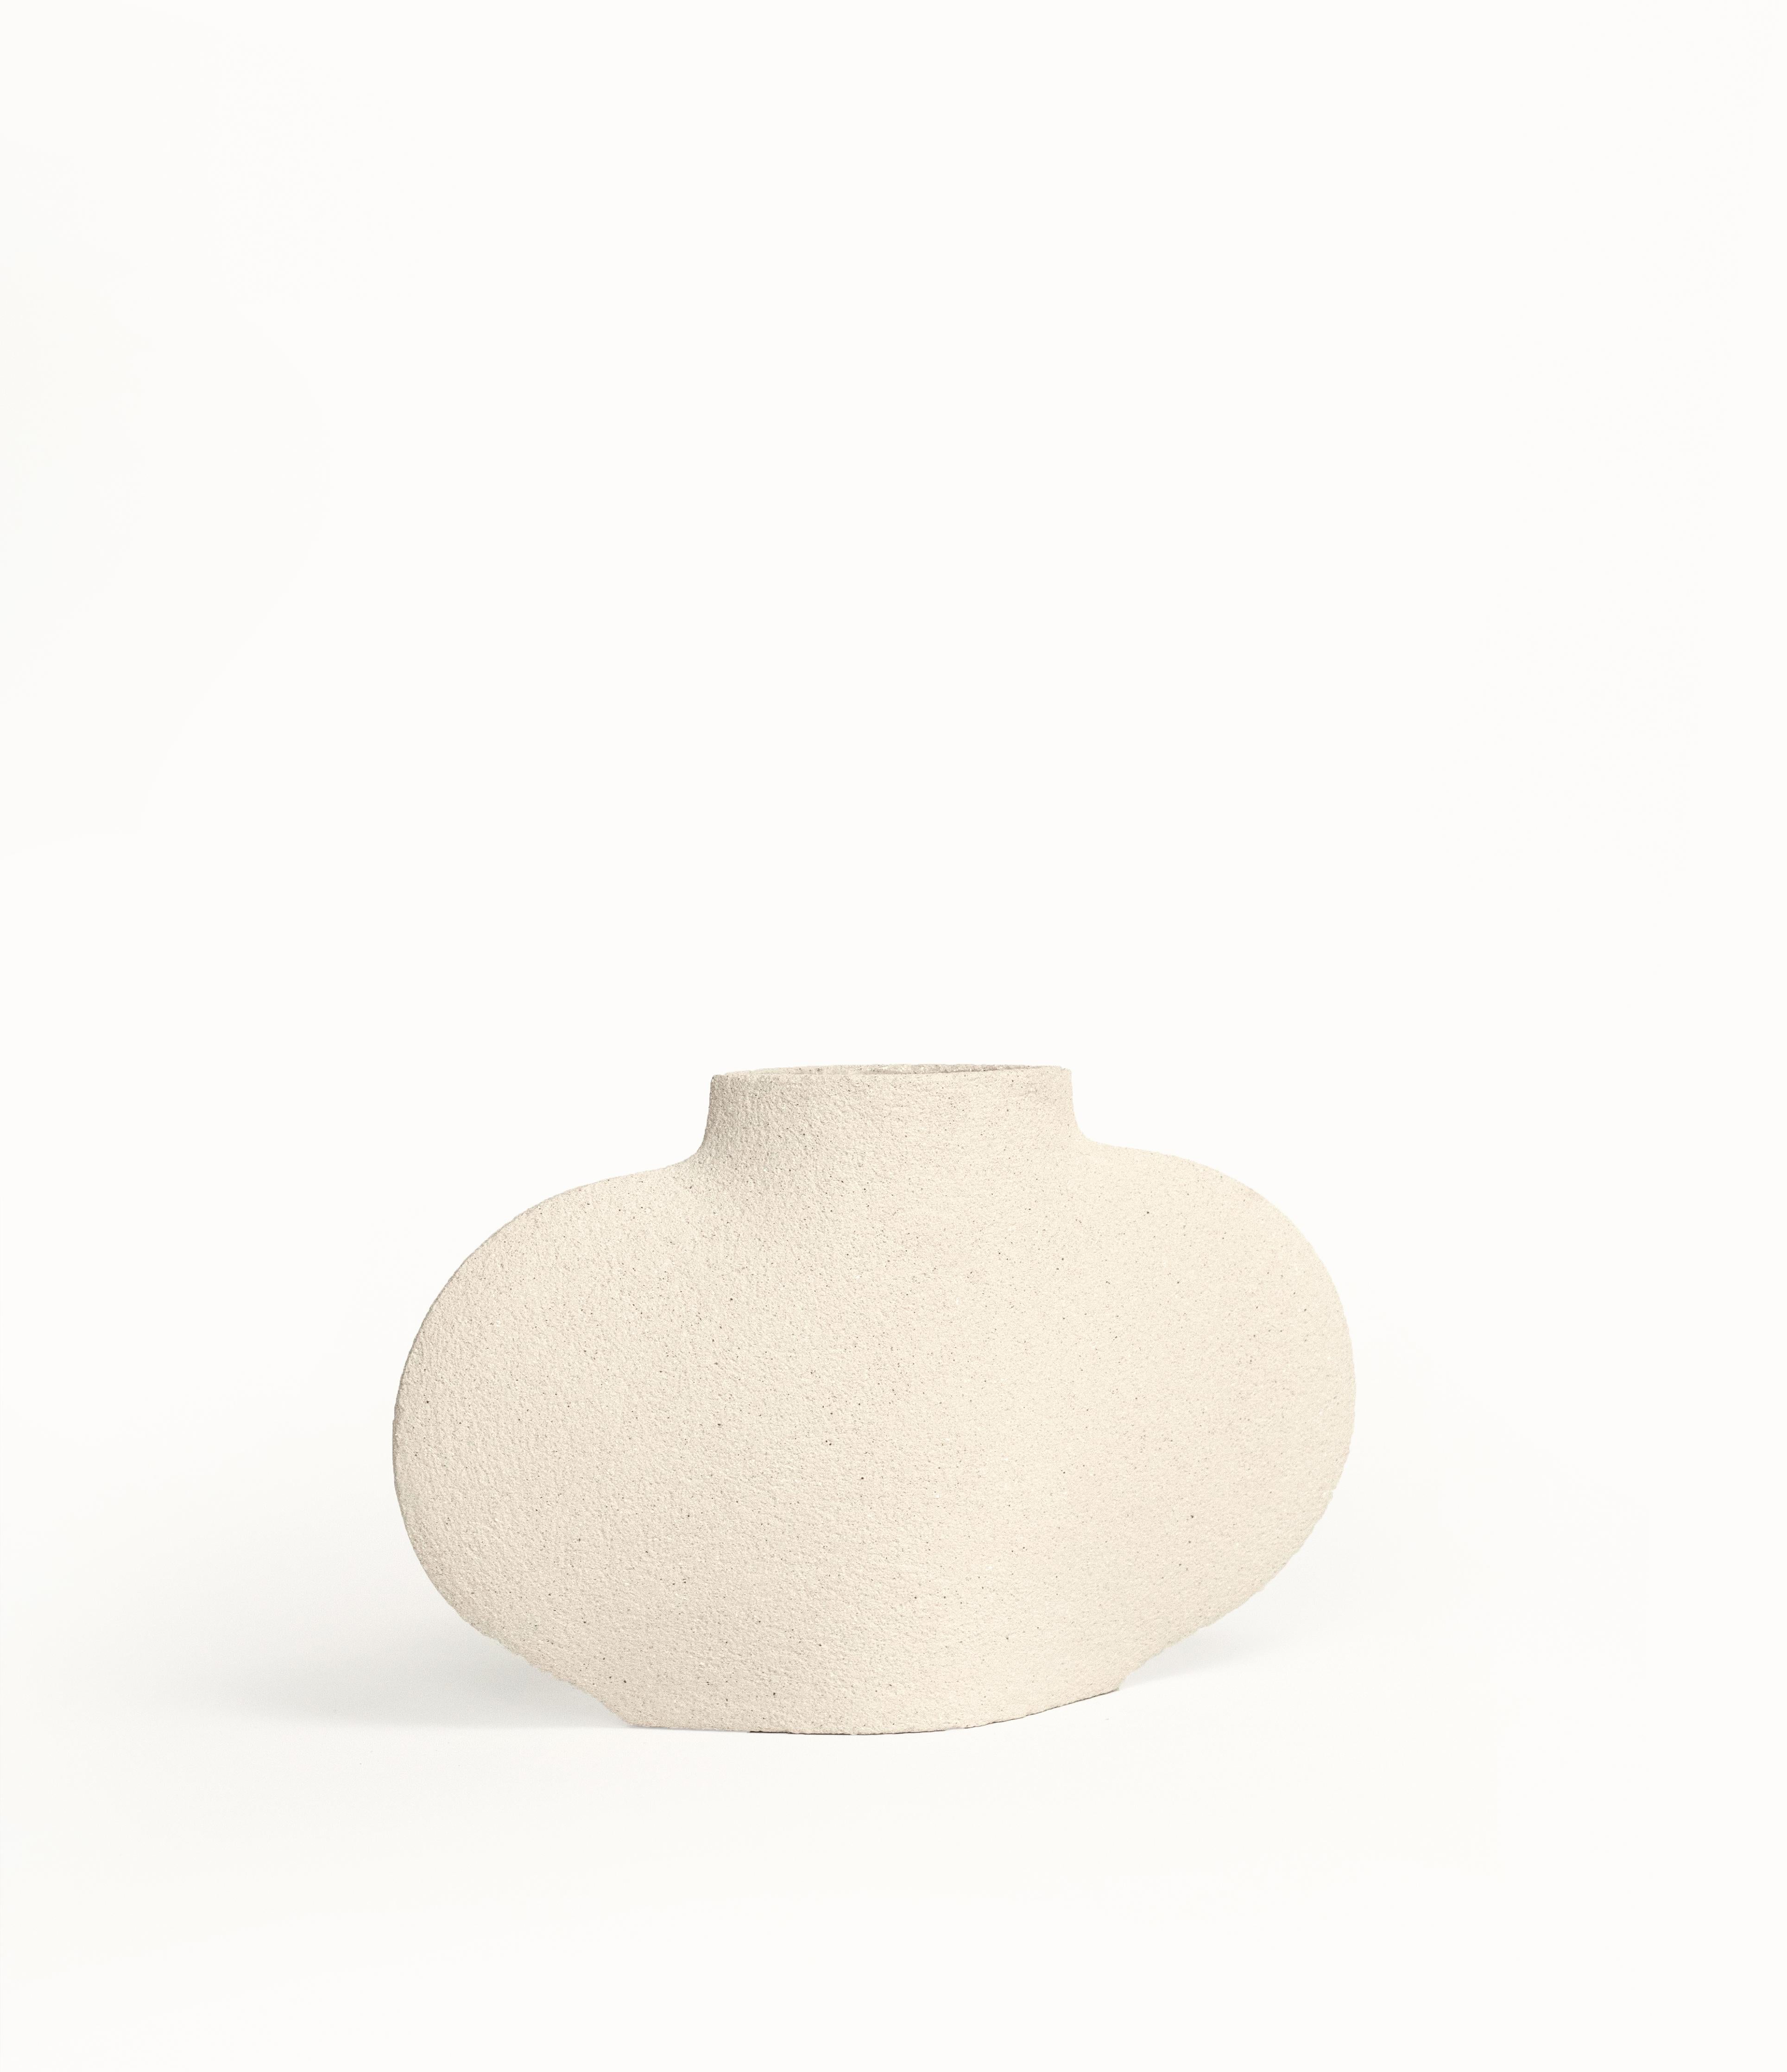 Ailes N°2 - white

Hand-crafted in our studio in France.

H: 14 cm / L: 24 cm
H: 5.5 inch / L: 9.5 inch

- Stoneware fired at high temperature finished with transparent glossy glaze inside.
- Raw exterior showcasing the natural aspect of the